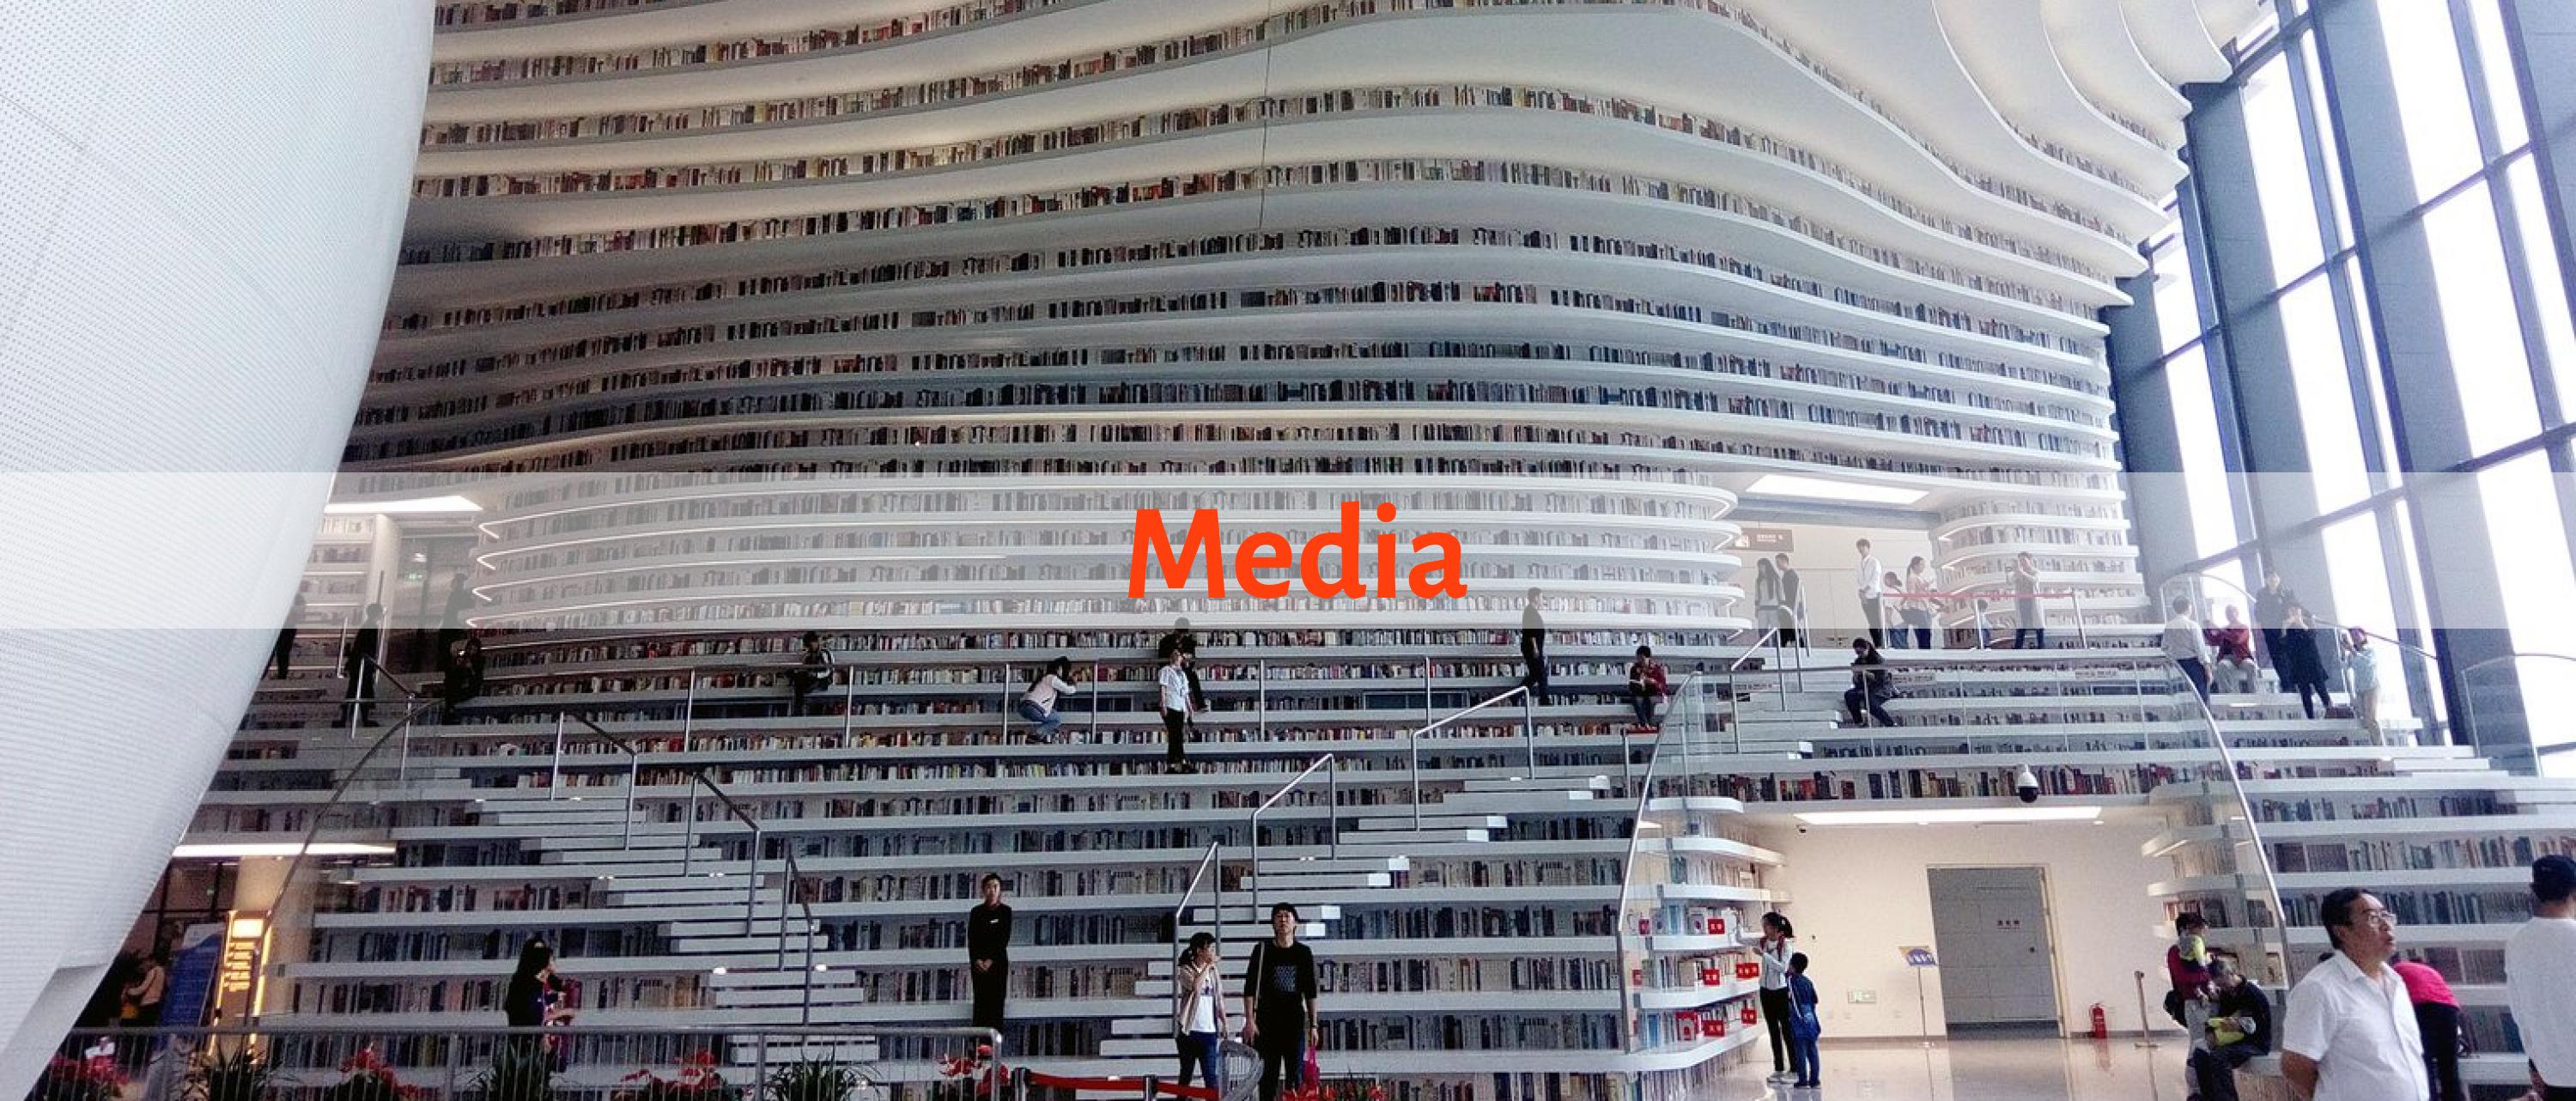 Inside view of the Binhai library.